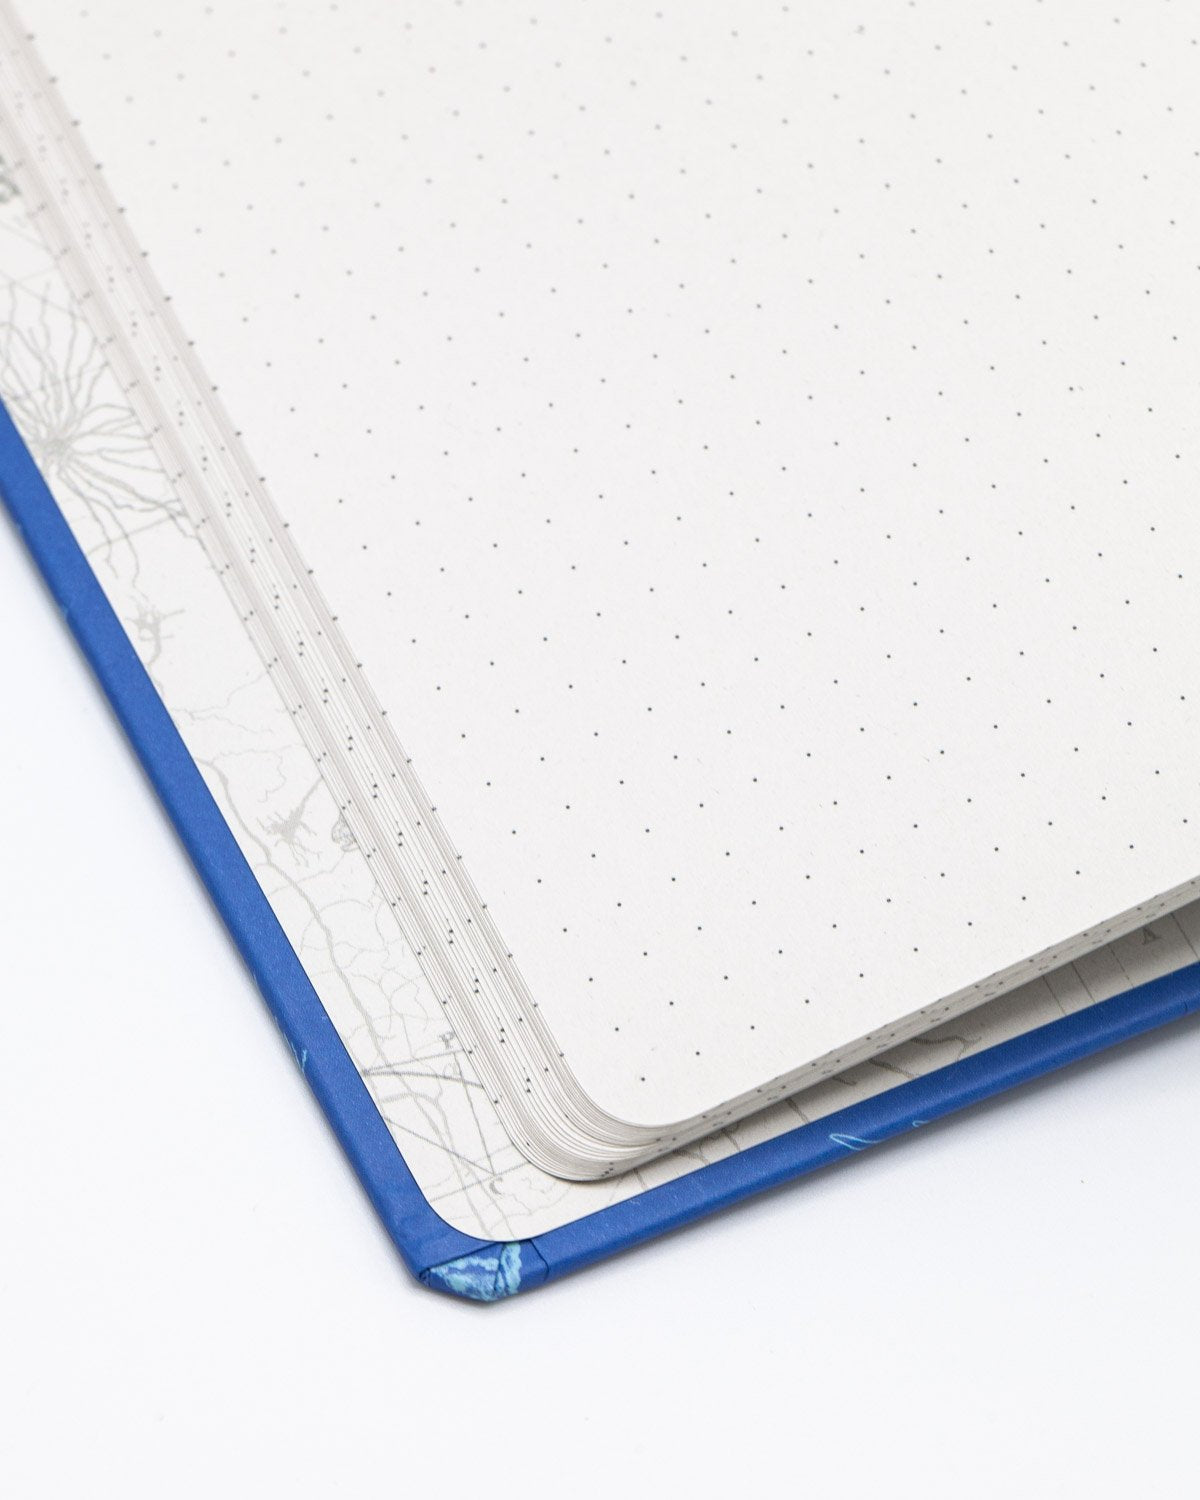 Inside cover of Marine animals hardcover dot grid notebook by Cognitive Surplus, sea blue, 100% recycled paper